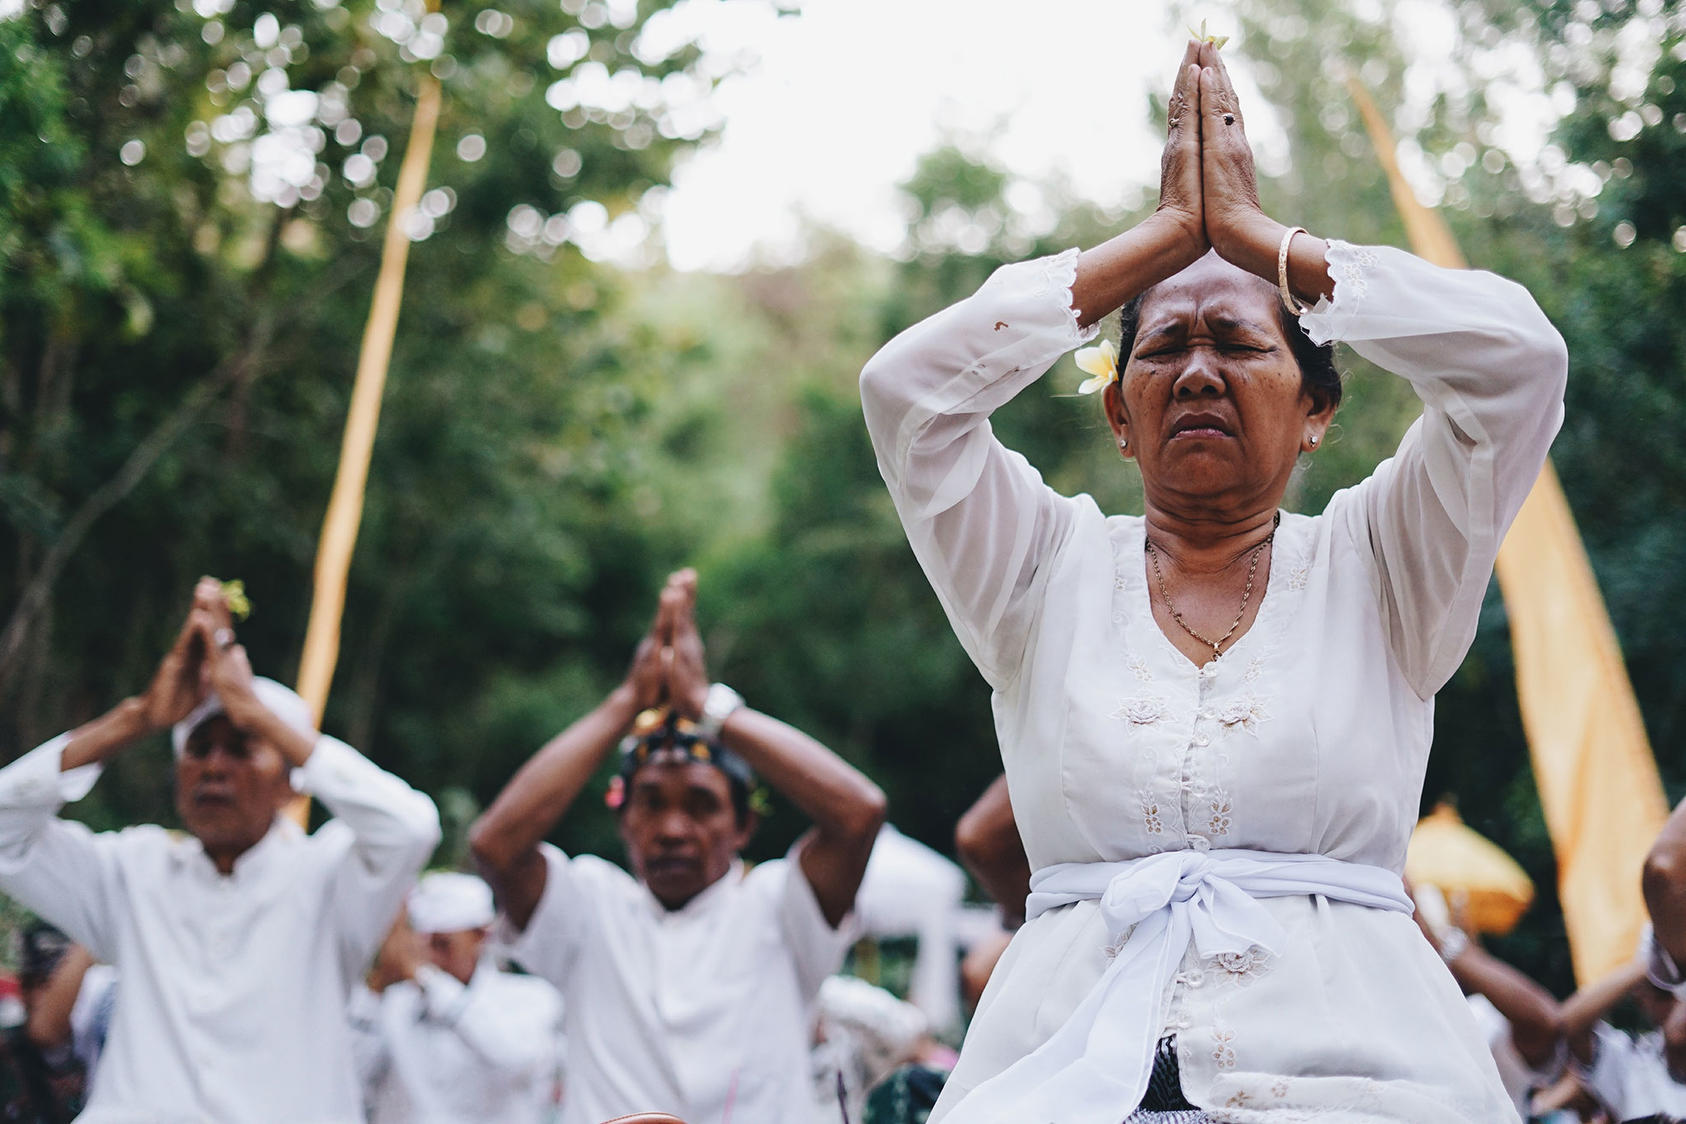 A woman participates in spiritual practice in Bali, Indonesia. While Islam is by far the dominant religion in Indonesia, there are small but growing minority populations from other religious traditions including Christianity and Hinduism. 